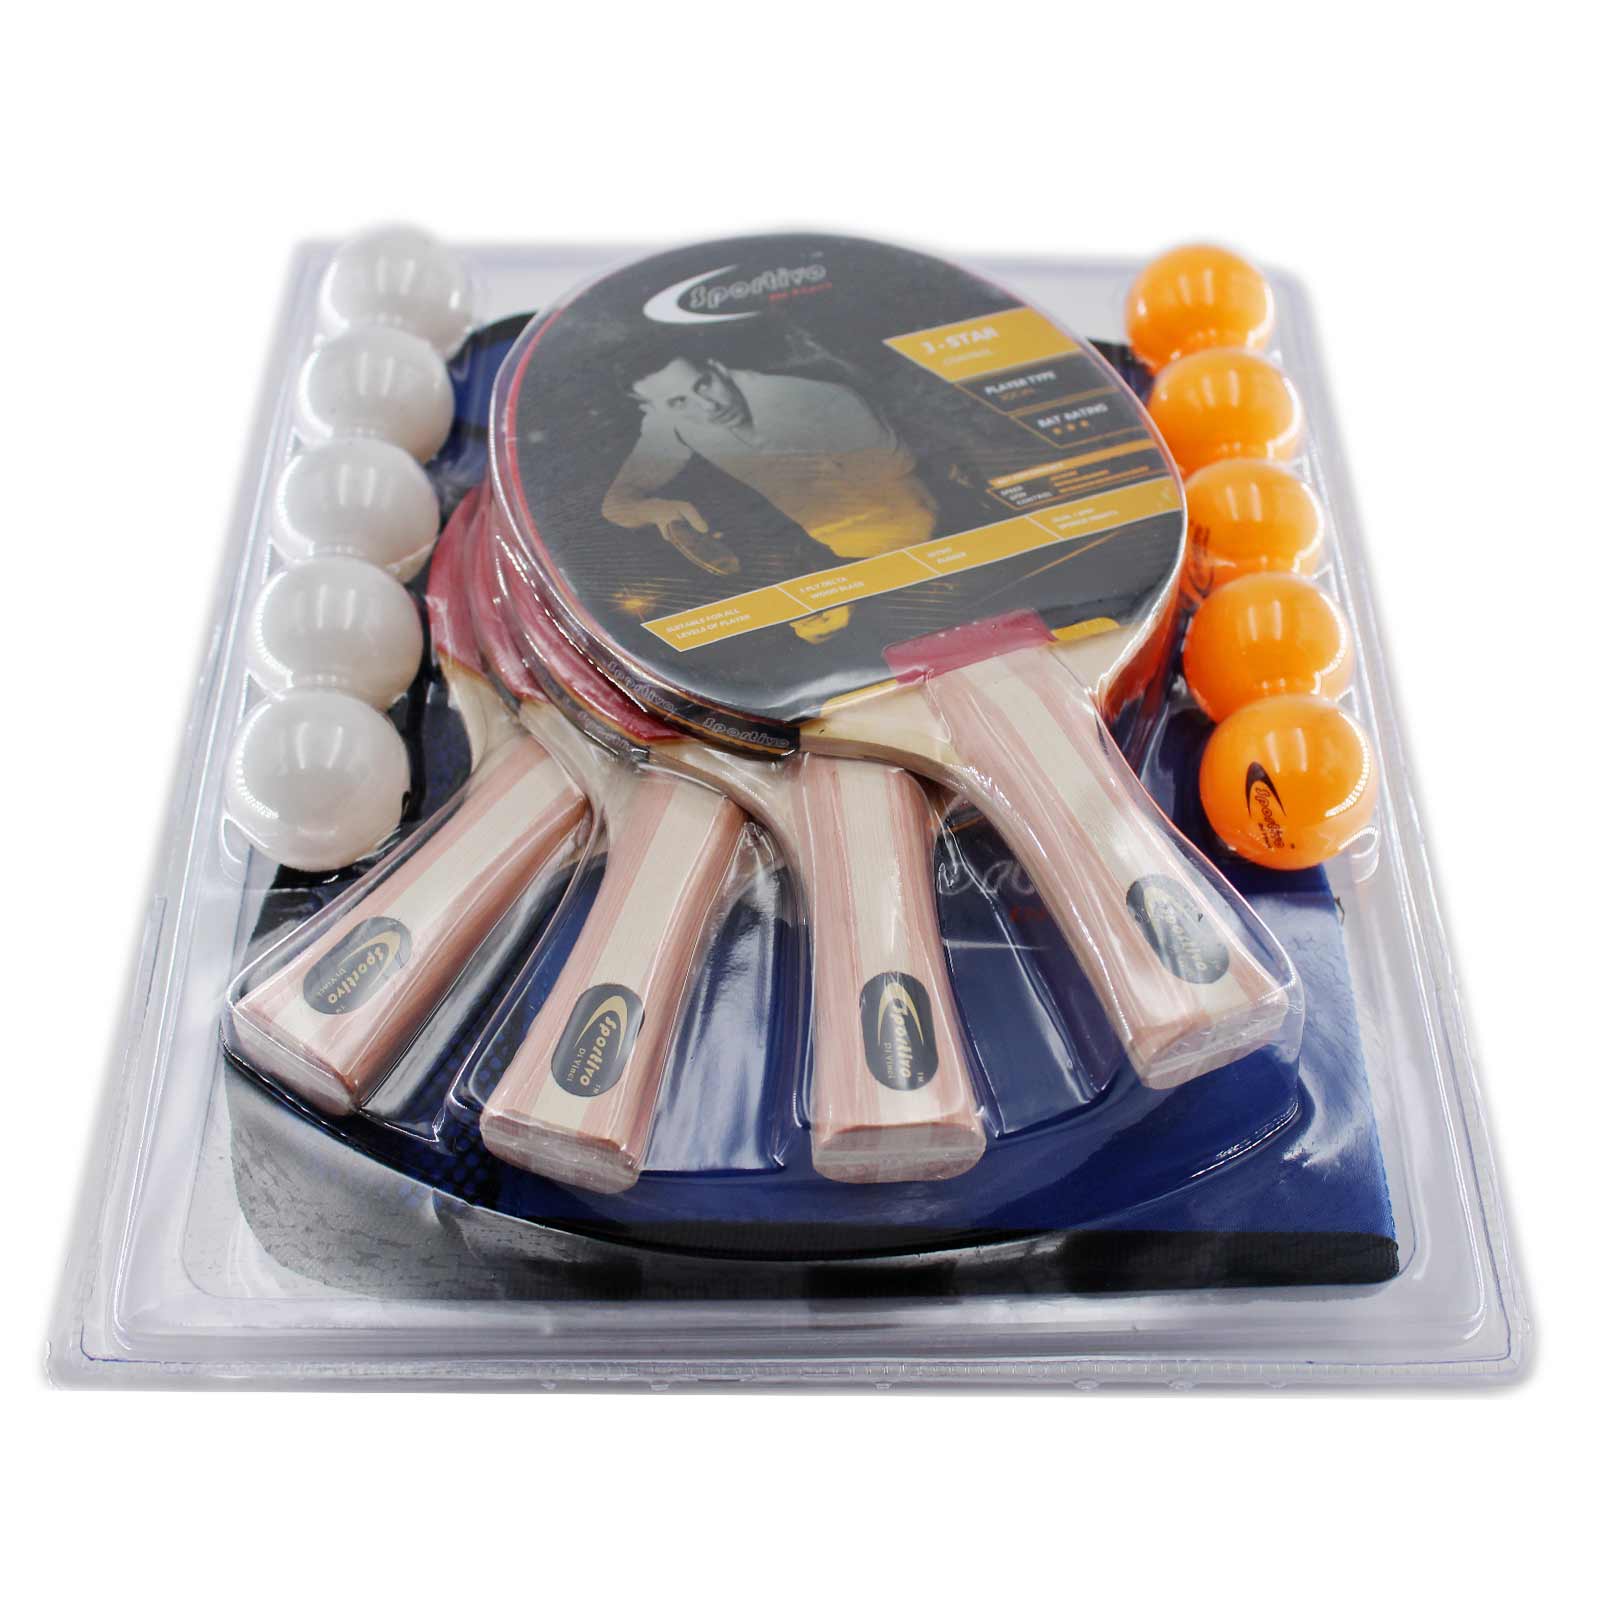 Table Tennis Accessory Package (Deluxe)